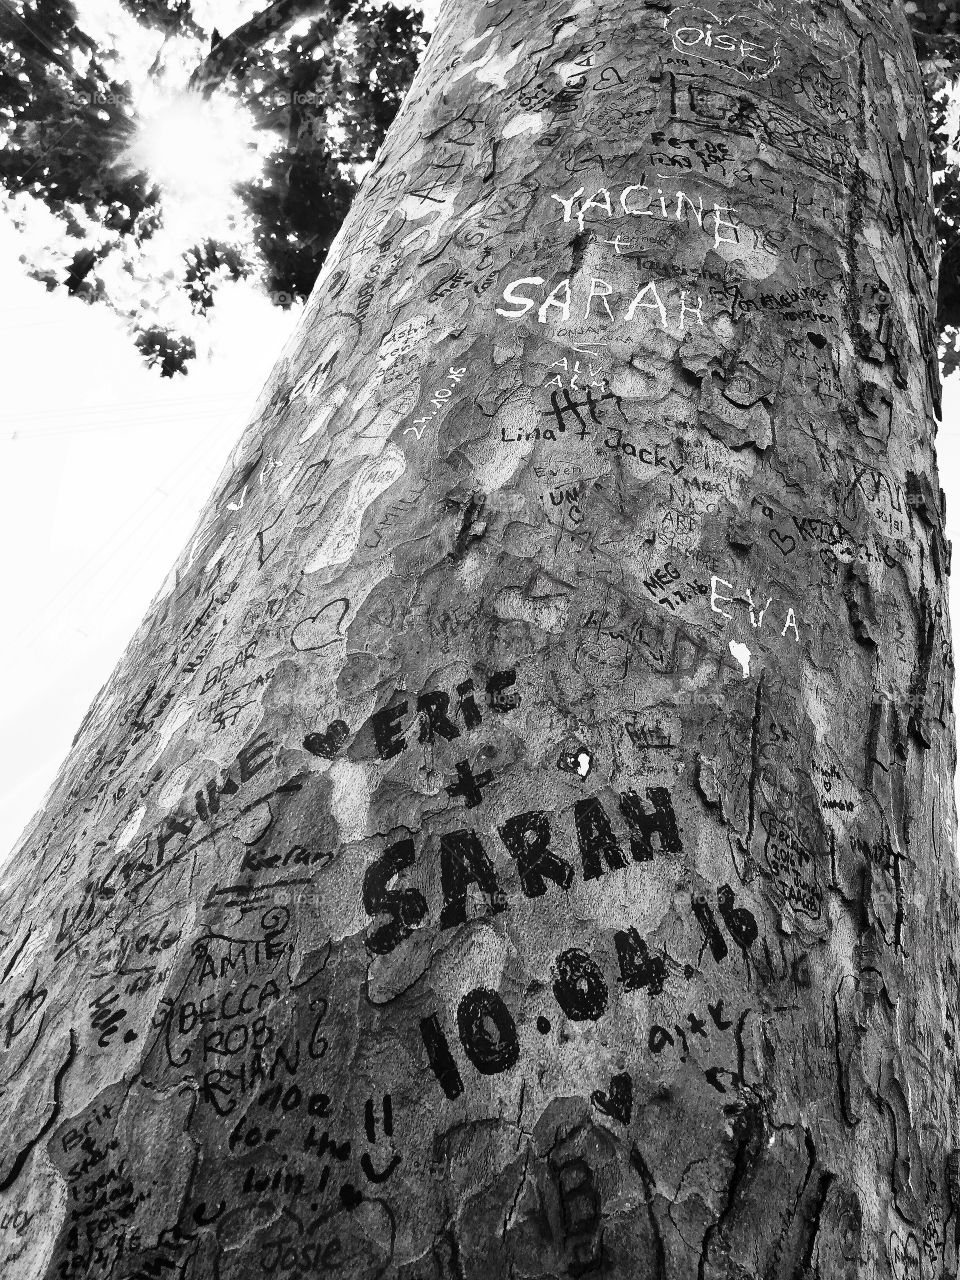 The Southbank London, names, dates, words carved in the tree